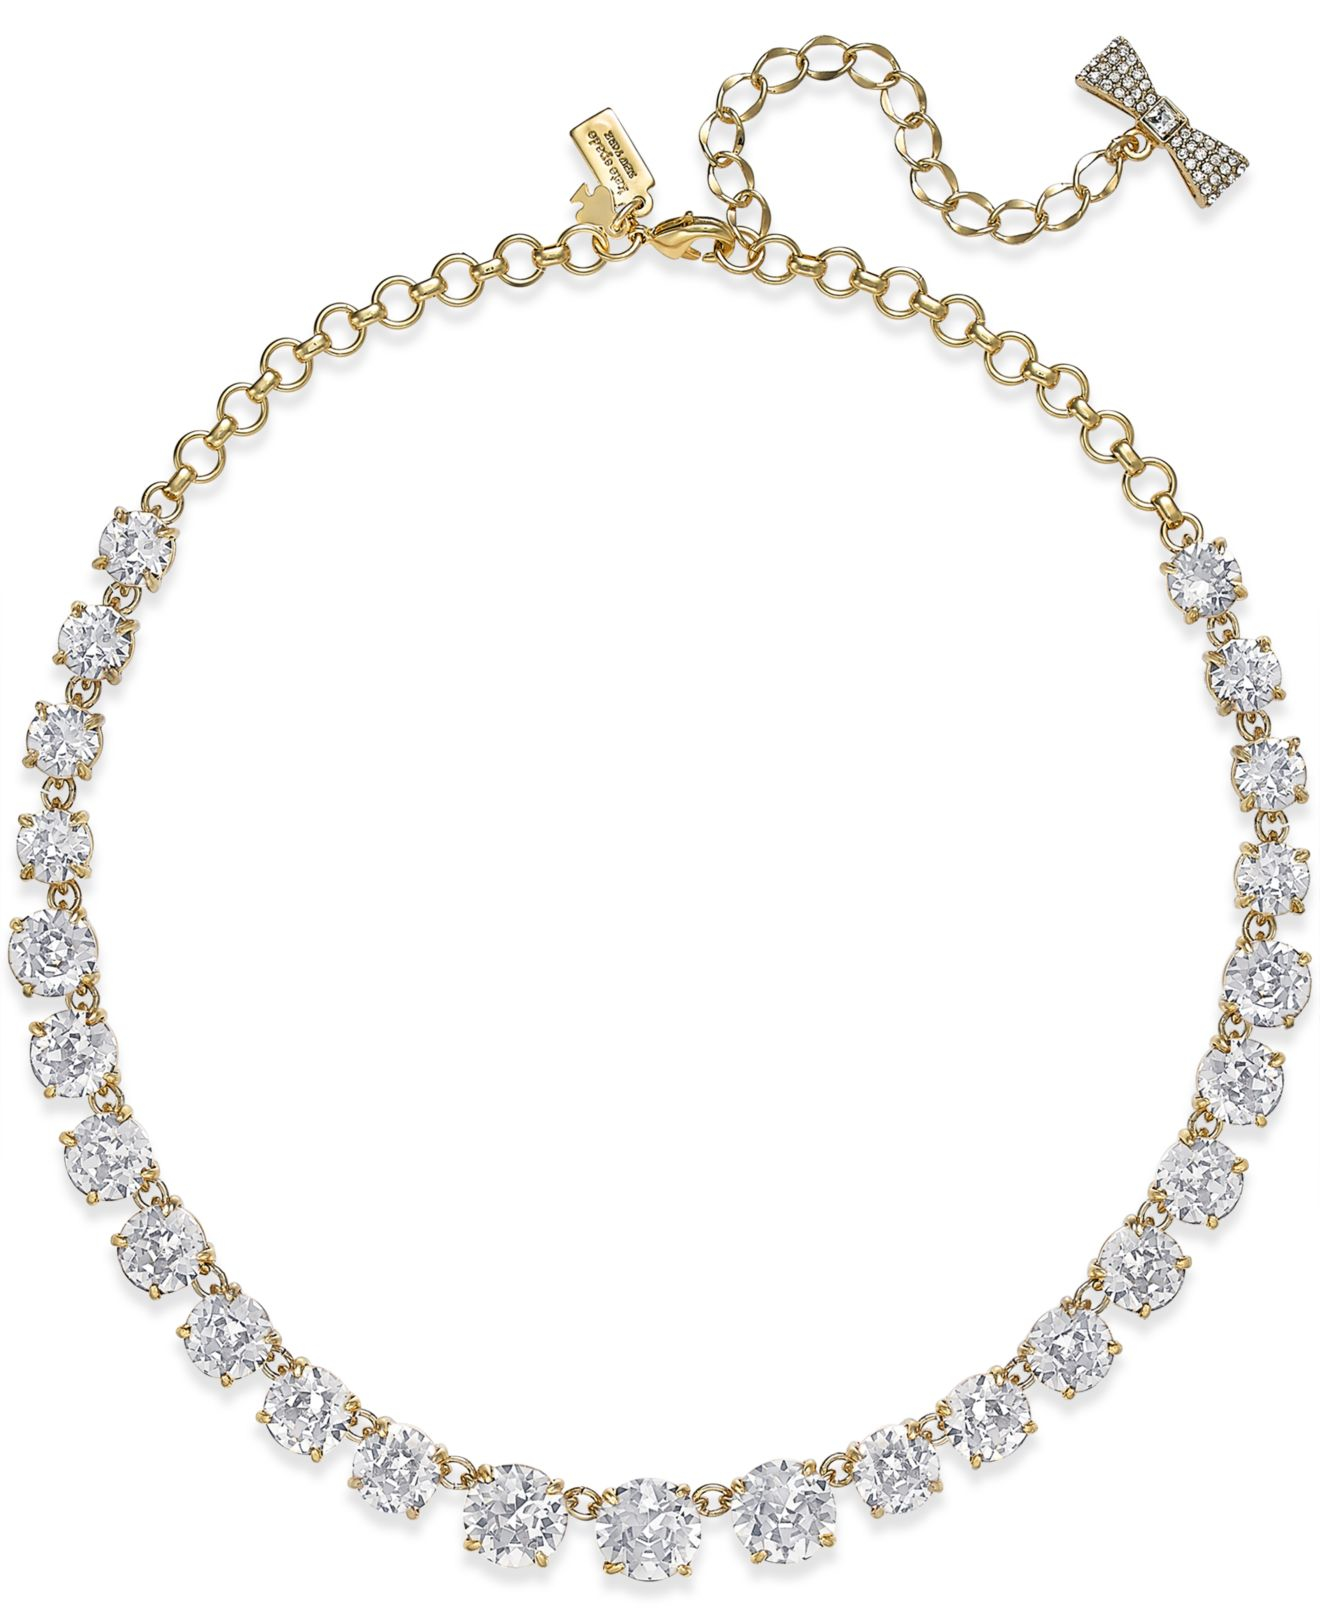 Lyst - Kate spade new york 12k Gold-plated Crystal Necklace in Metallic